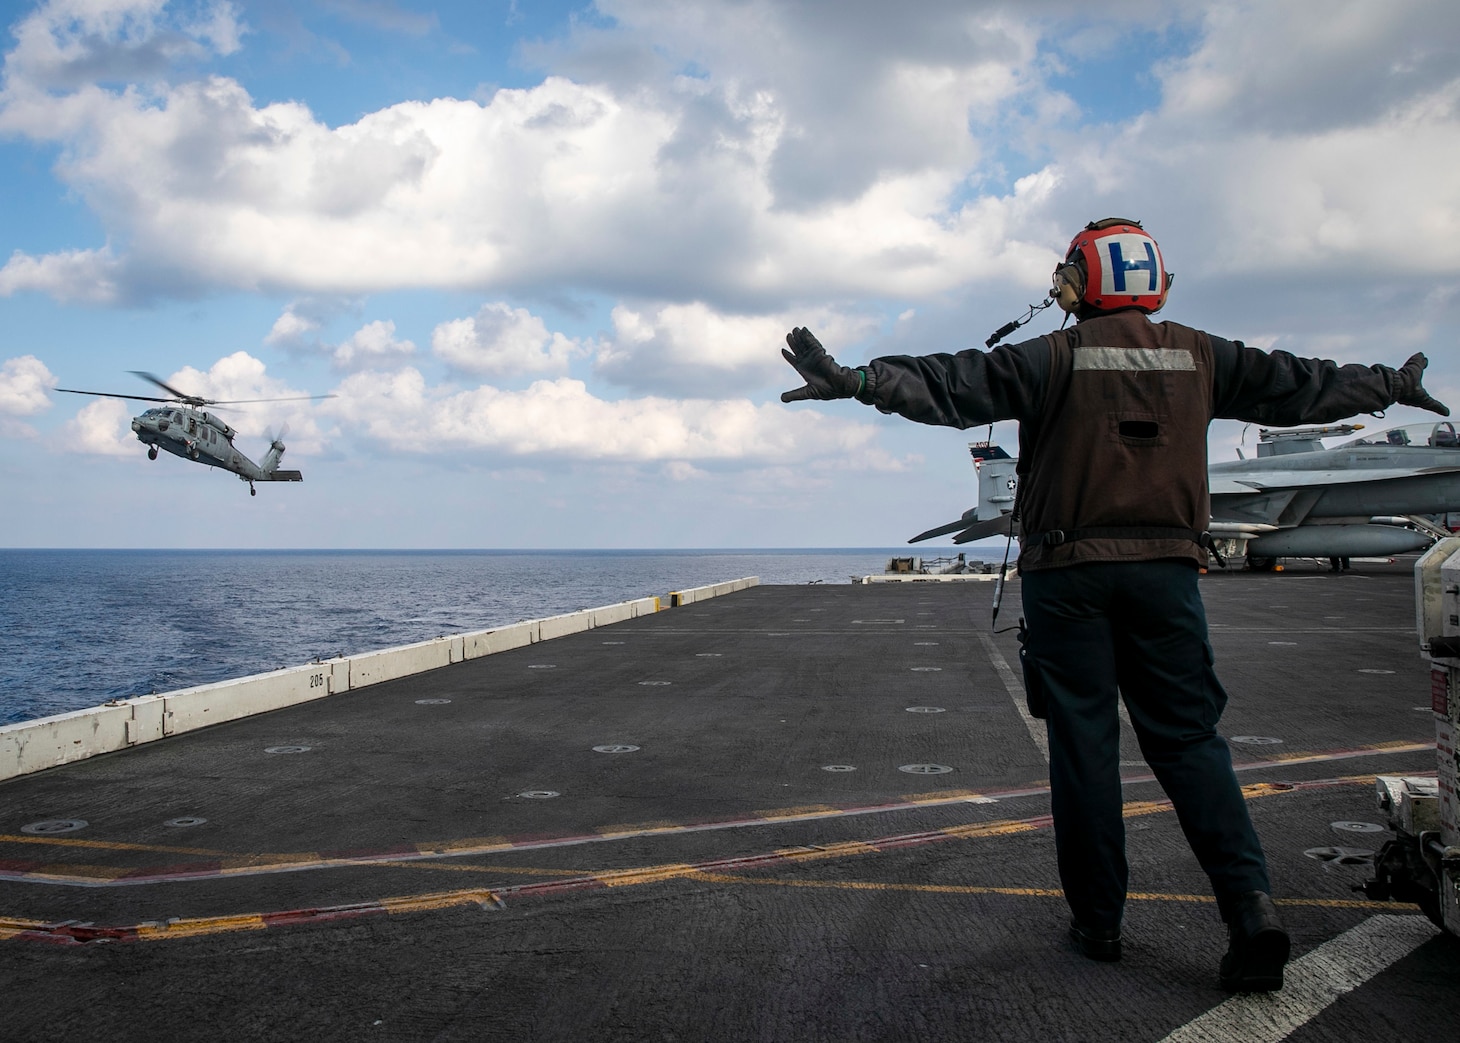 Airman Estefany Rodriguezvegas, assigned to the Nimitz-class aircraft carrier USS George H.W. Bush (CVN 77), directs an MH-60S Nighthawk helicopter, attached to Helicopter Sea Combat Squadron (HSC) 5, from the flight deck Jan. 23, 2023.